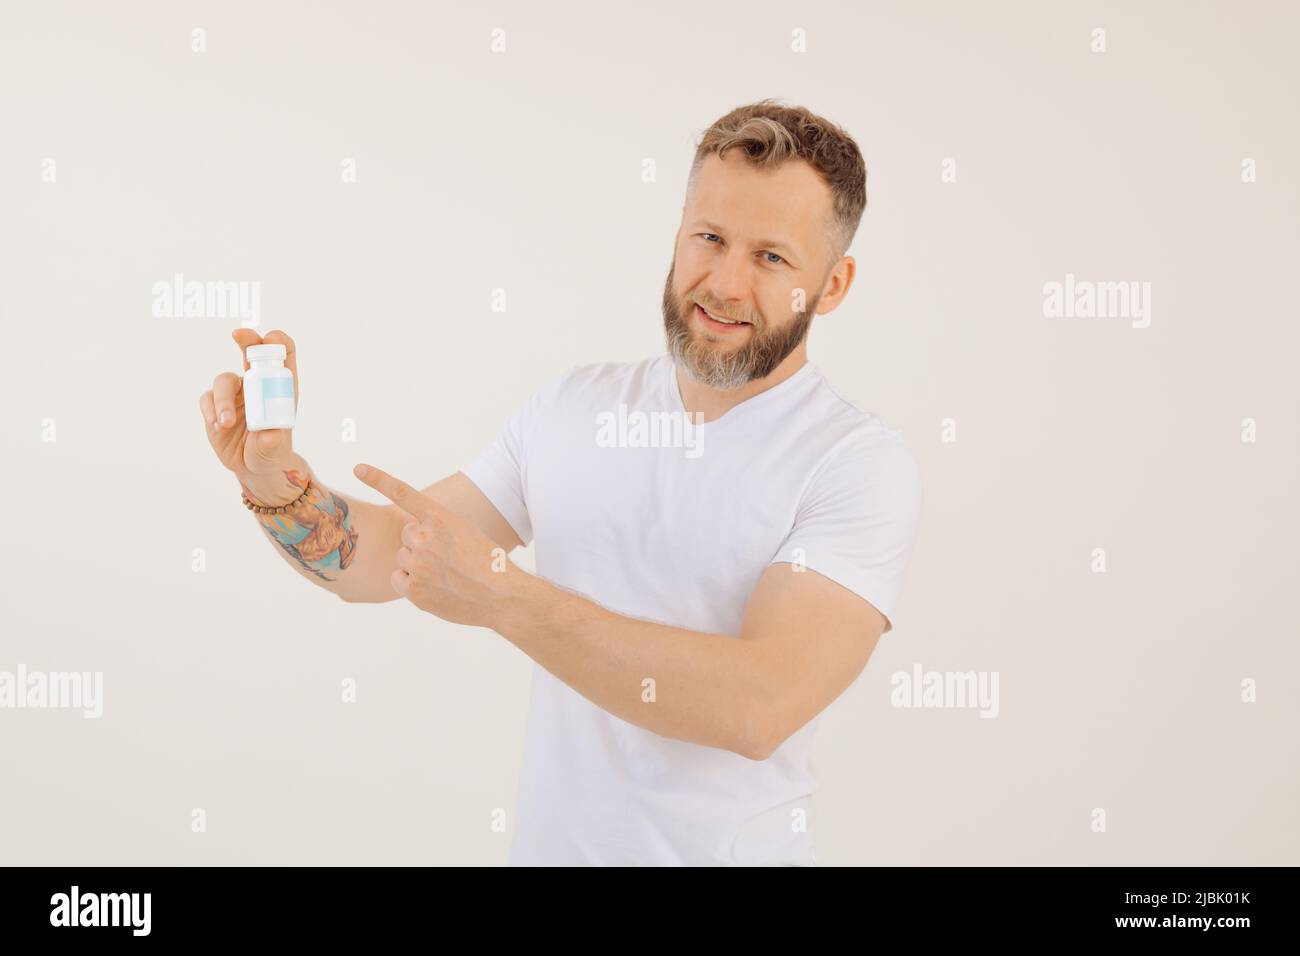 Portrait of young smiling man advertising useful vitamins for men, white background. Holding in hand and pointing at jar of pills, disease treatment Stock Photo